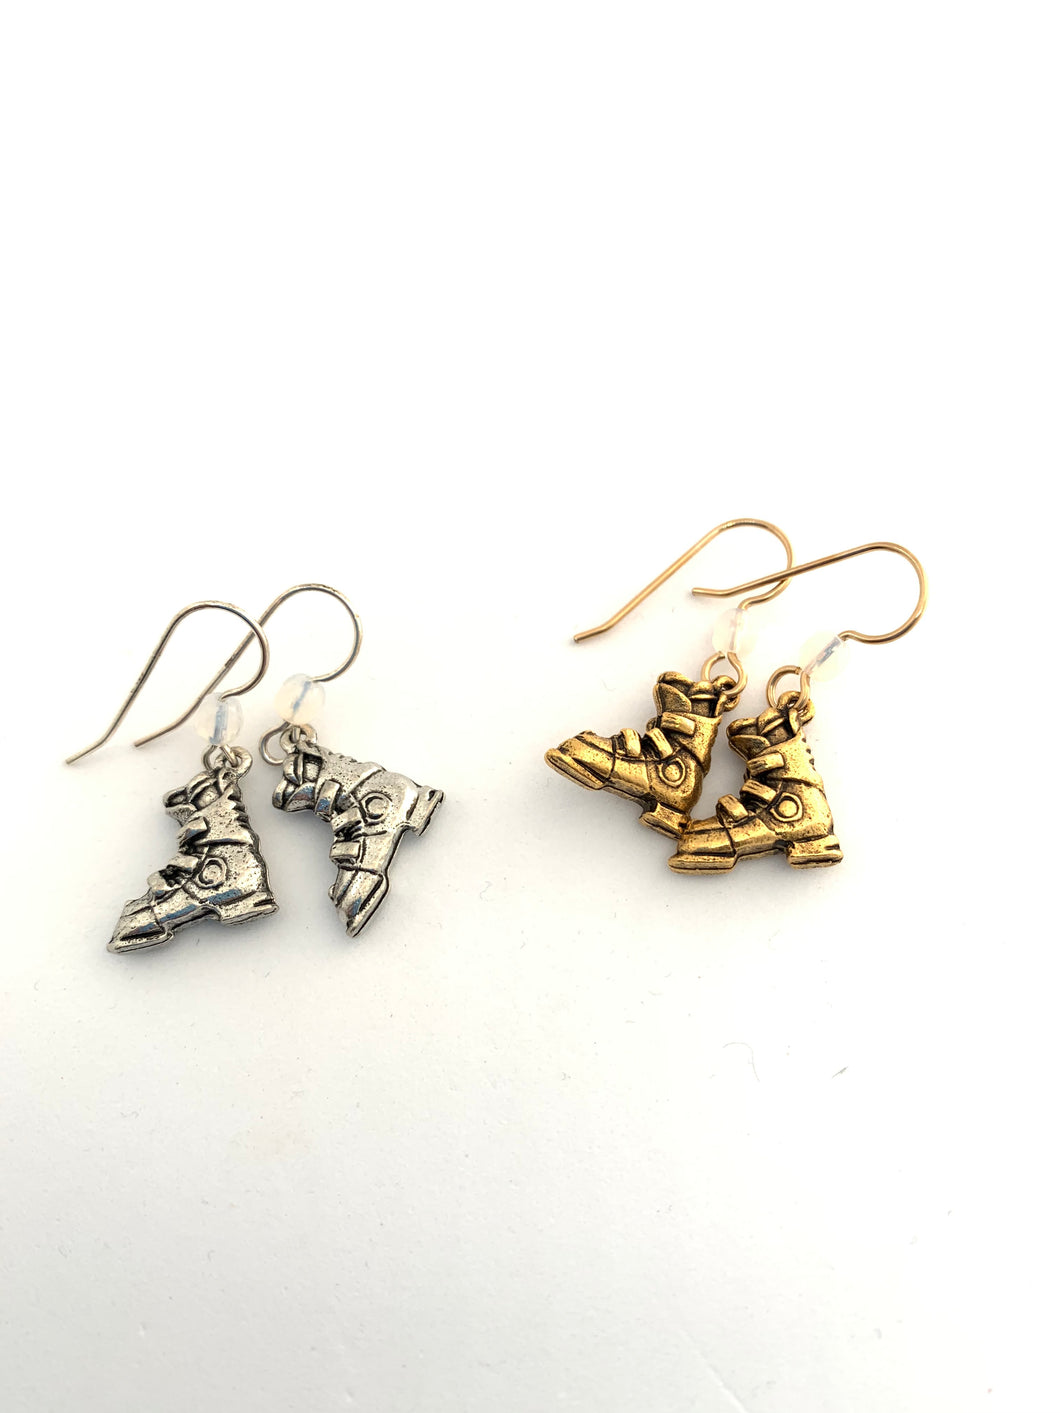 Ski Boot Earrings - Lively Accents